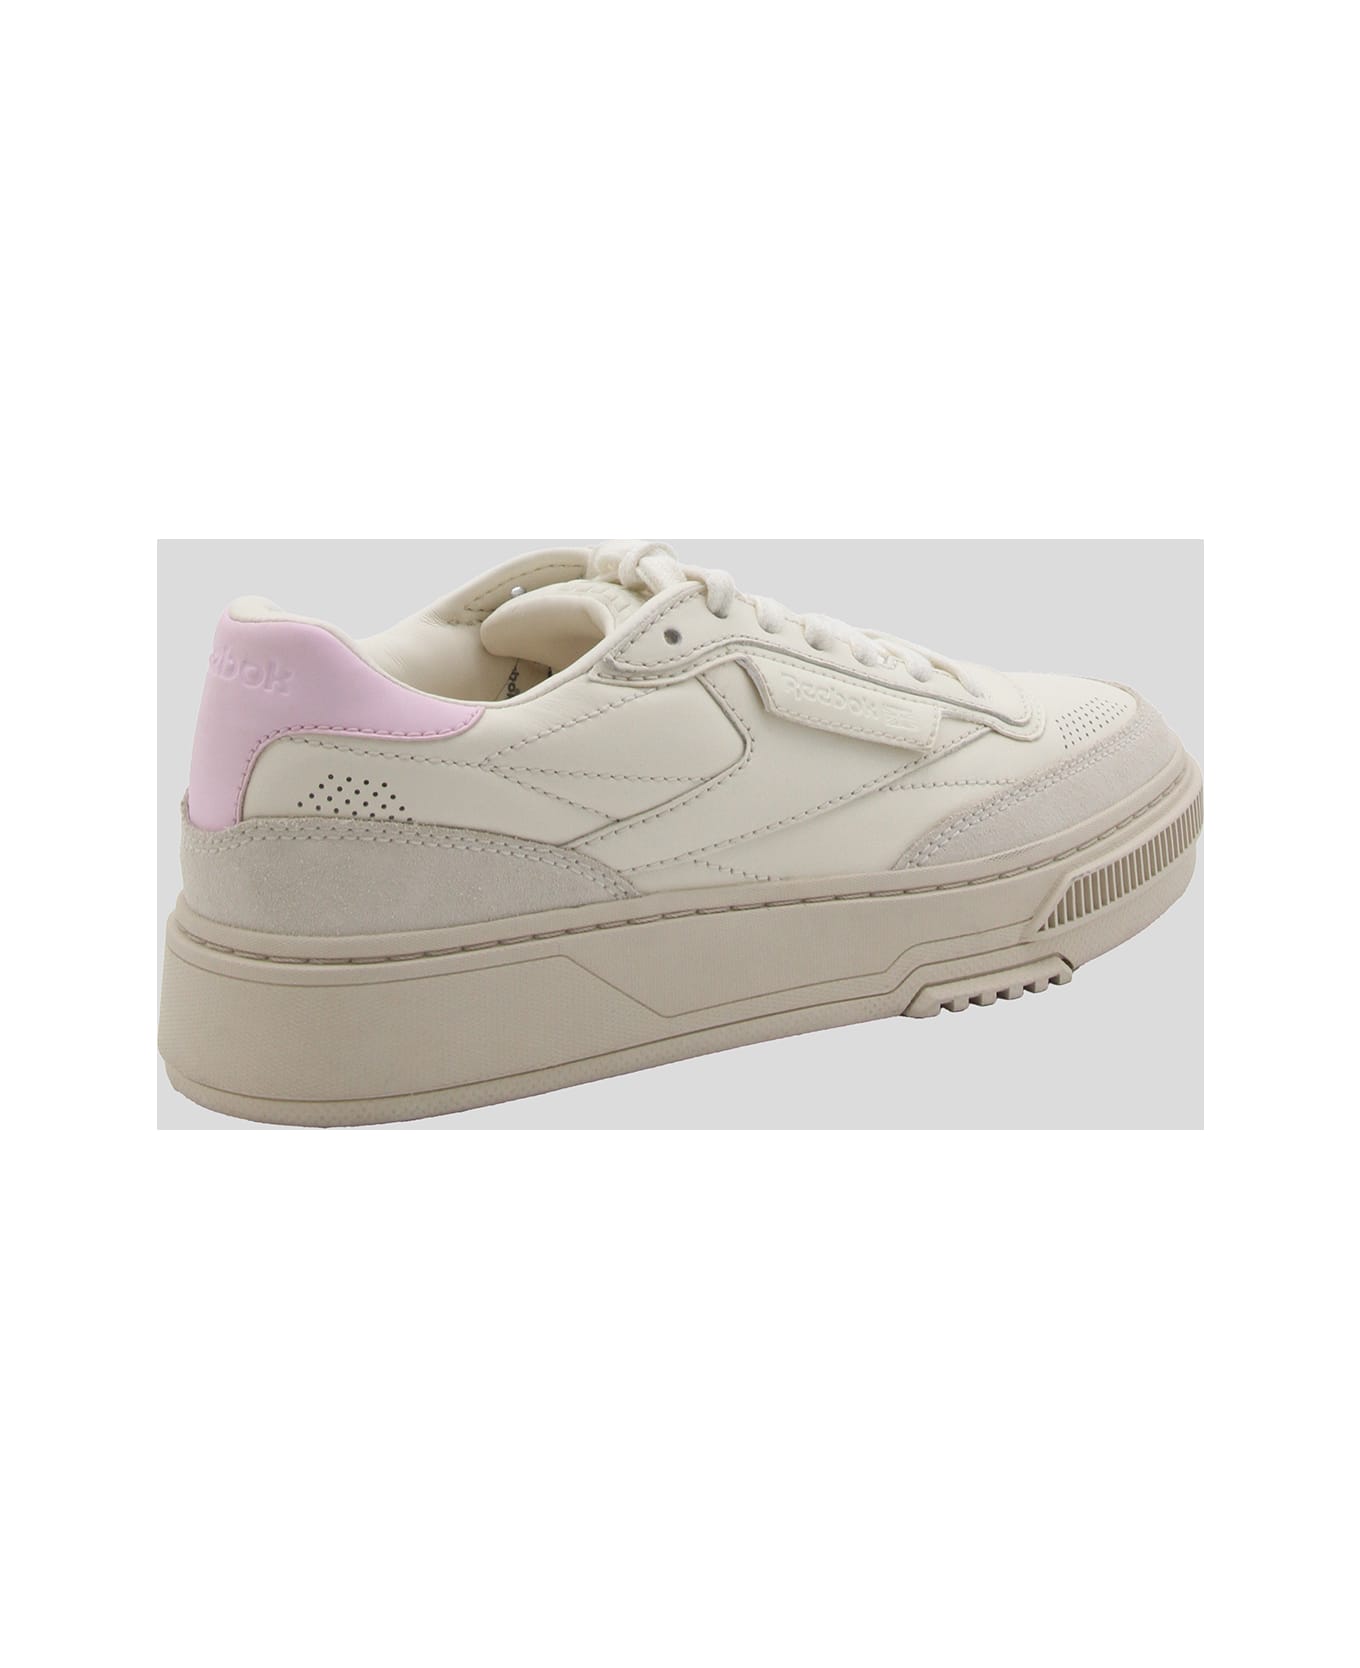 Reebok White And Pink Leather C Ltd Sneakers - White スニーカー